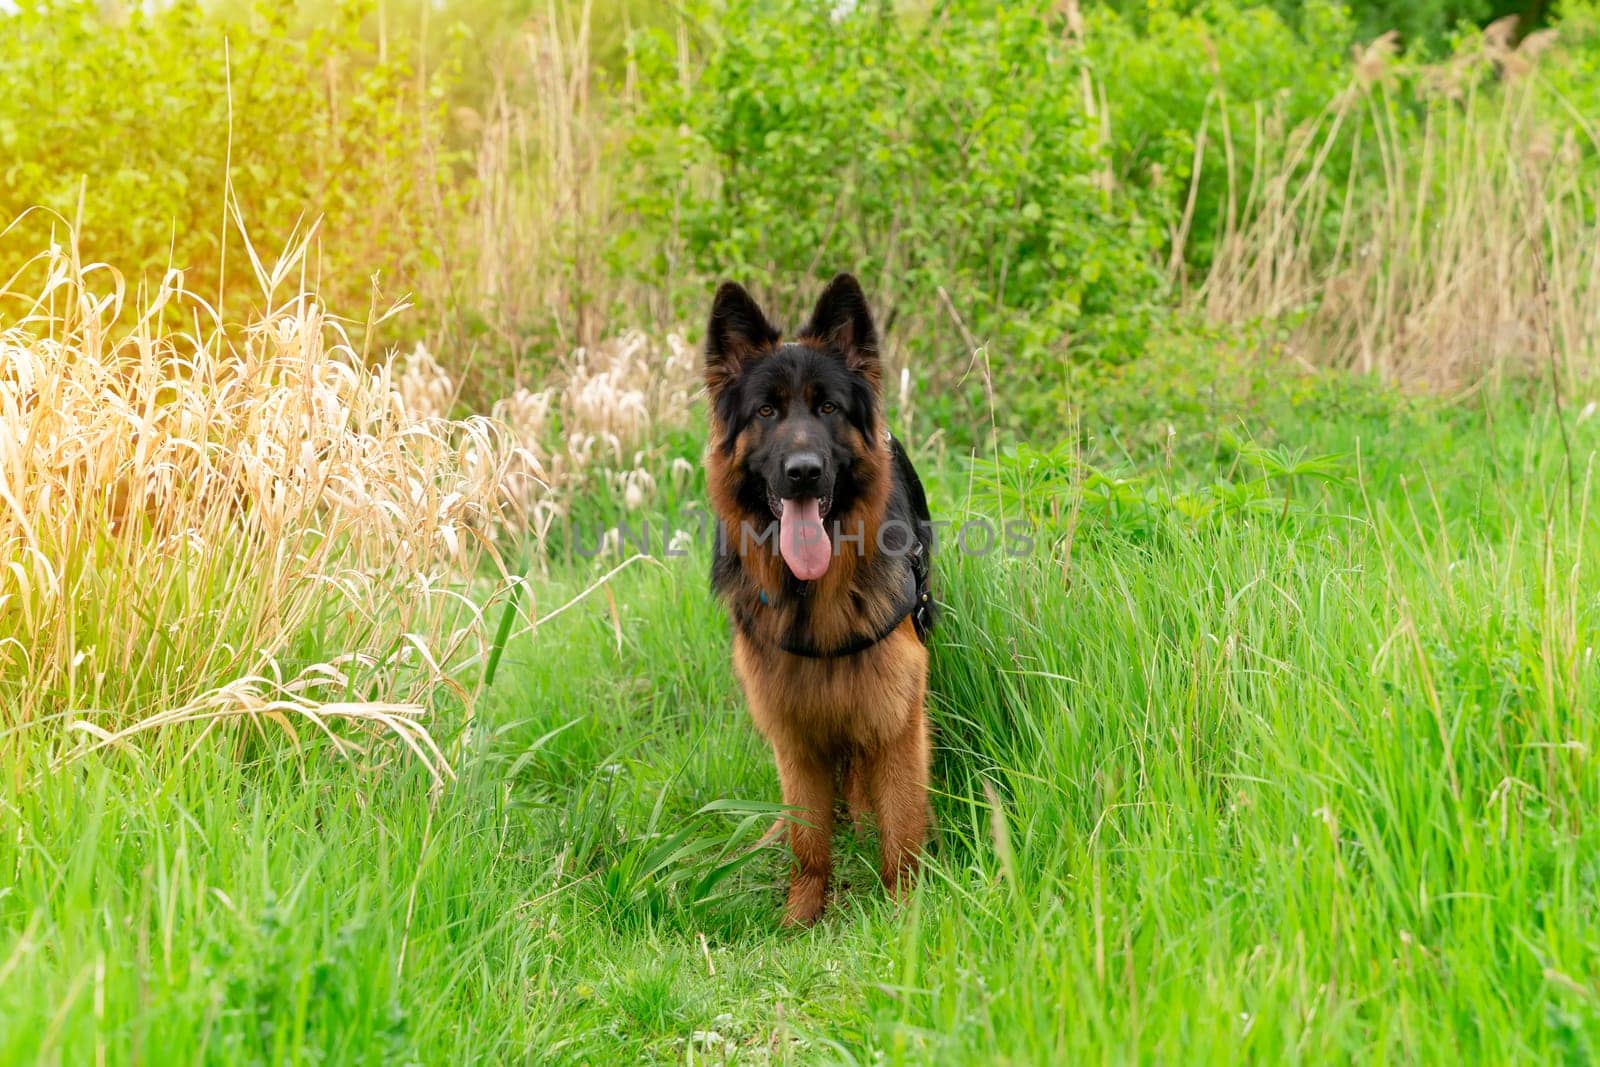 German shepherd dog in harness out for a walk lying, running, walking on the grass in sunny summer day